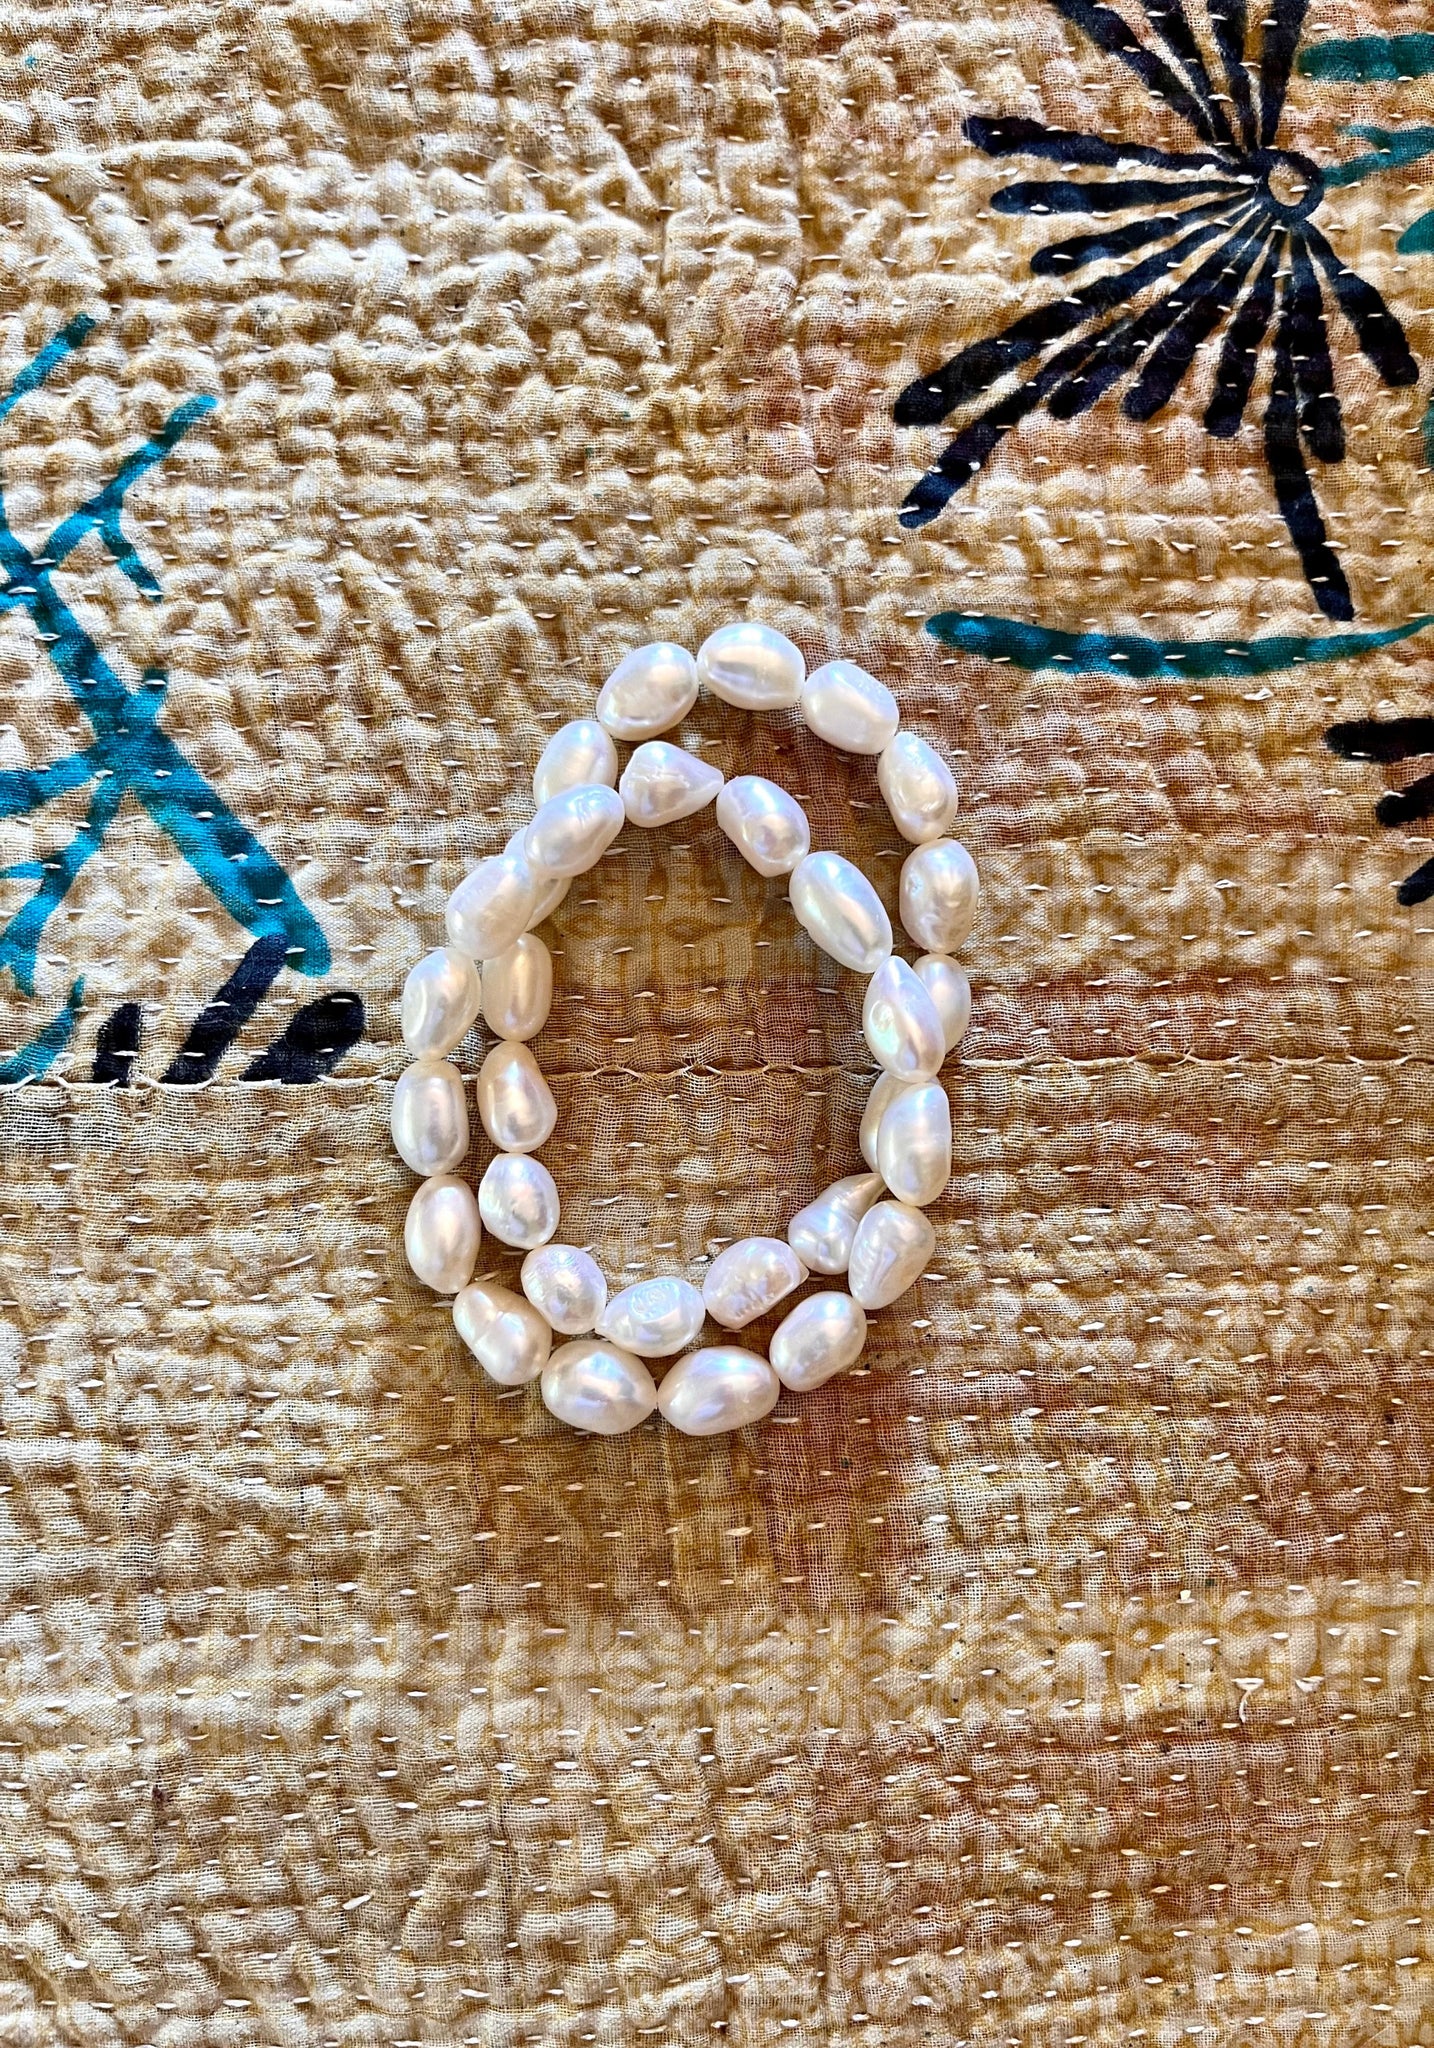 How to Make a Handmade White Pearl Bead Bracelet with Bead Flower Decorated  | Beaded jewelry diy, Beaded bracelets, Jewelry patterns